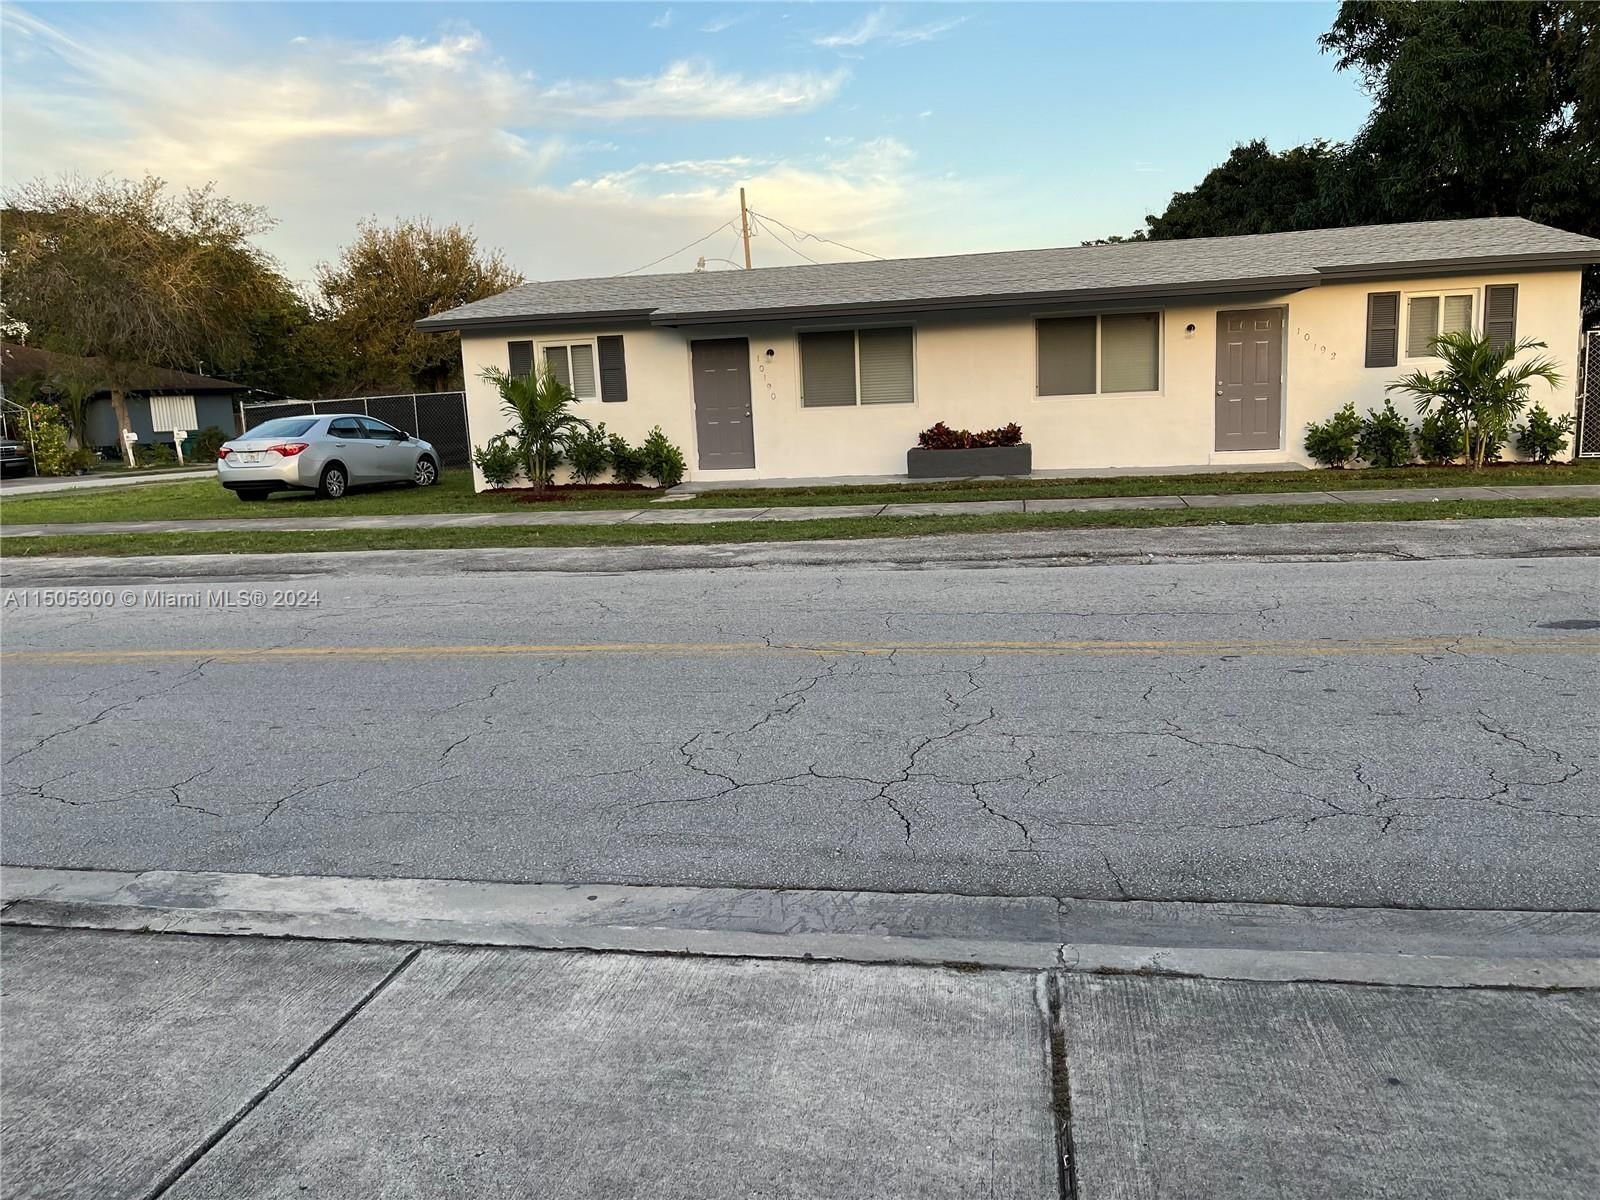 Real estate property located at 10190-10192 Guava street, Miami-Dade County, Map of Perrine, Miami, FL